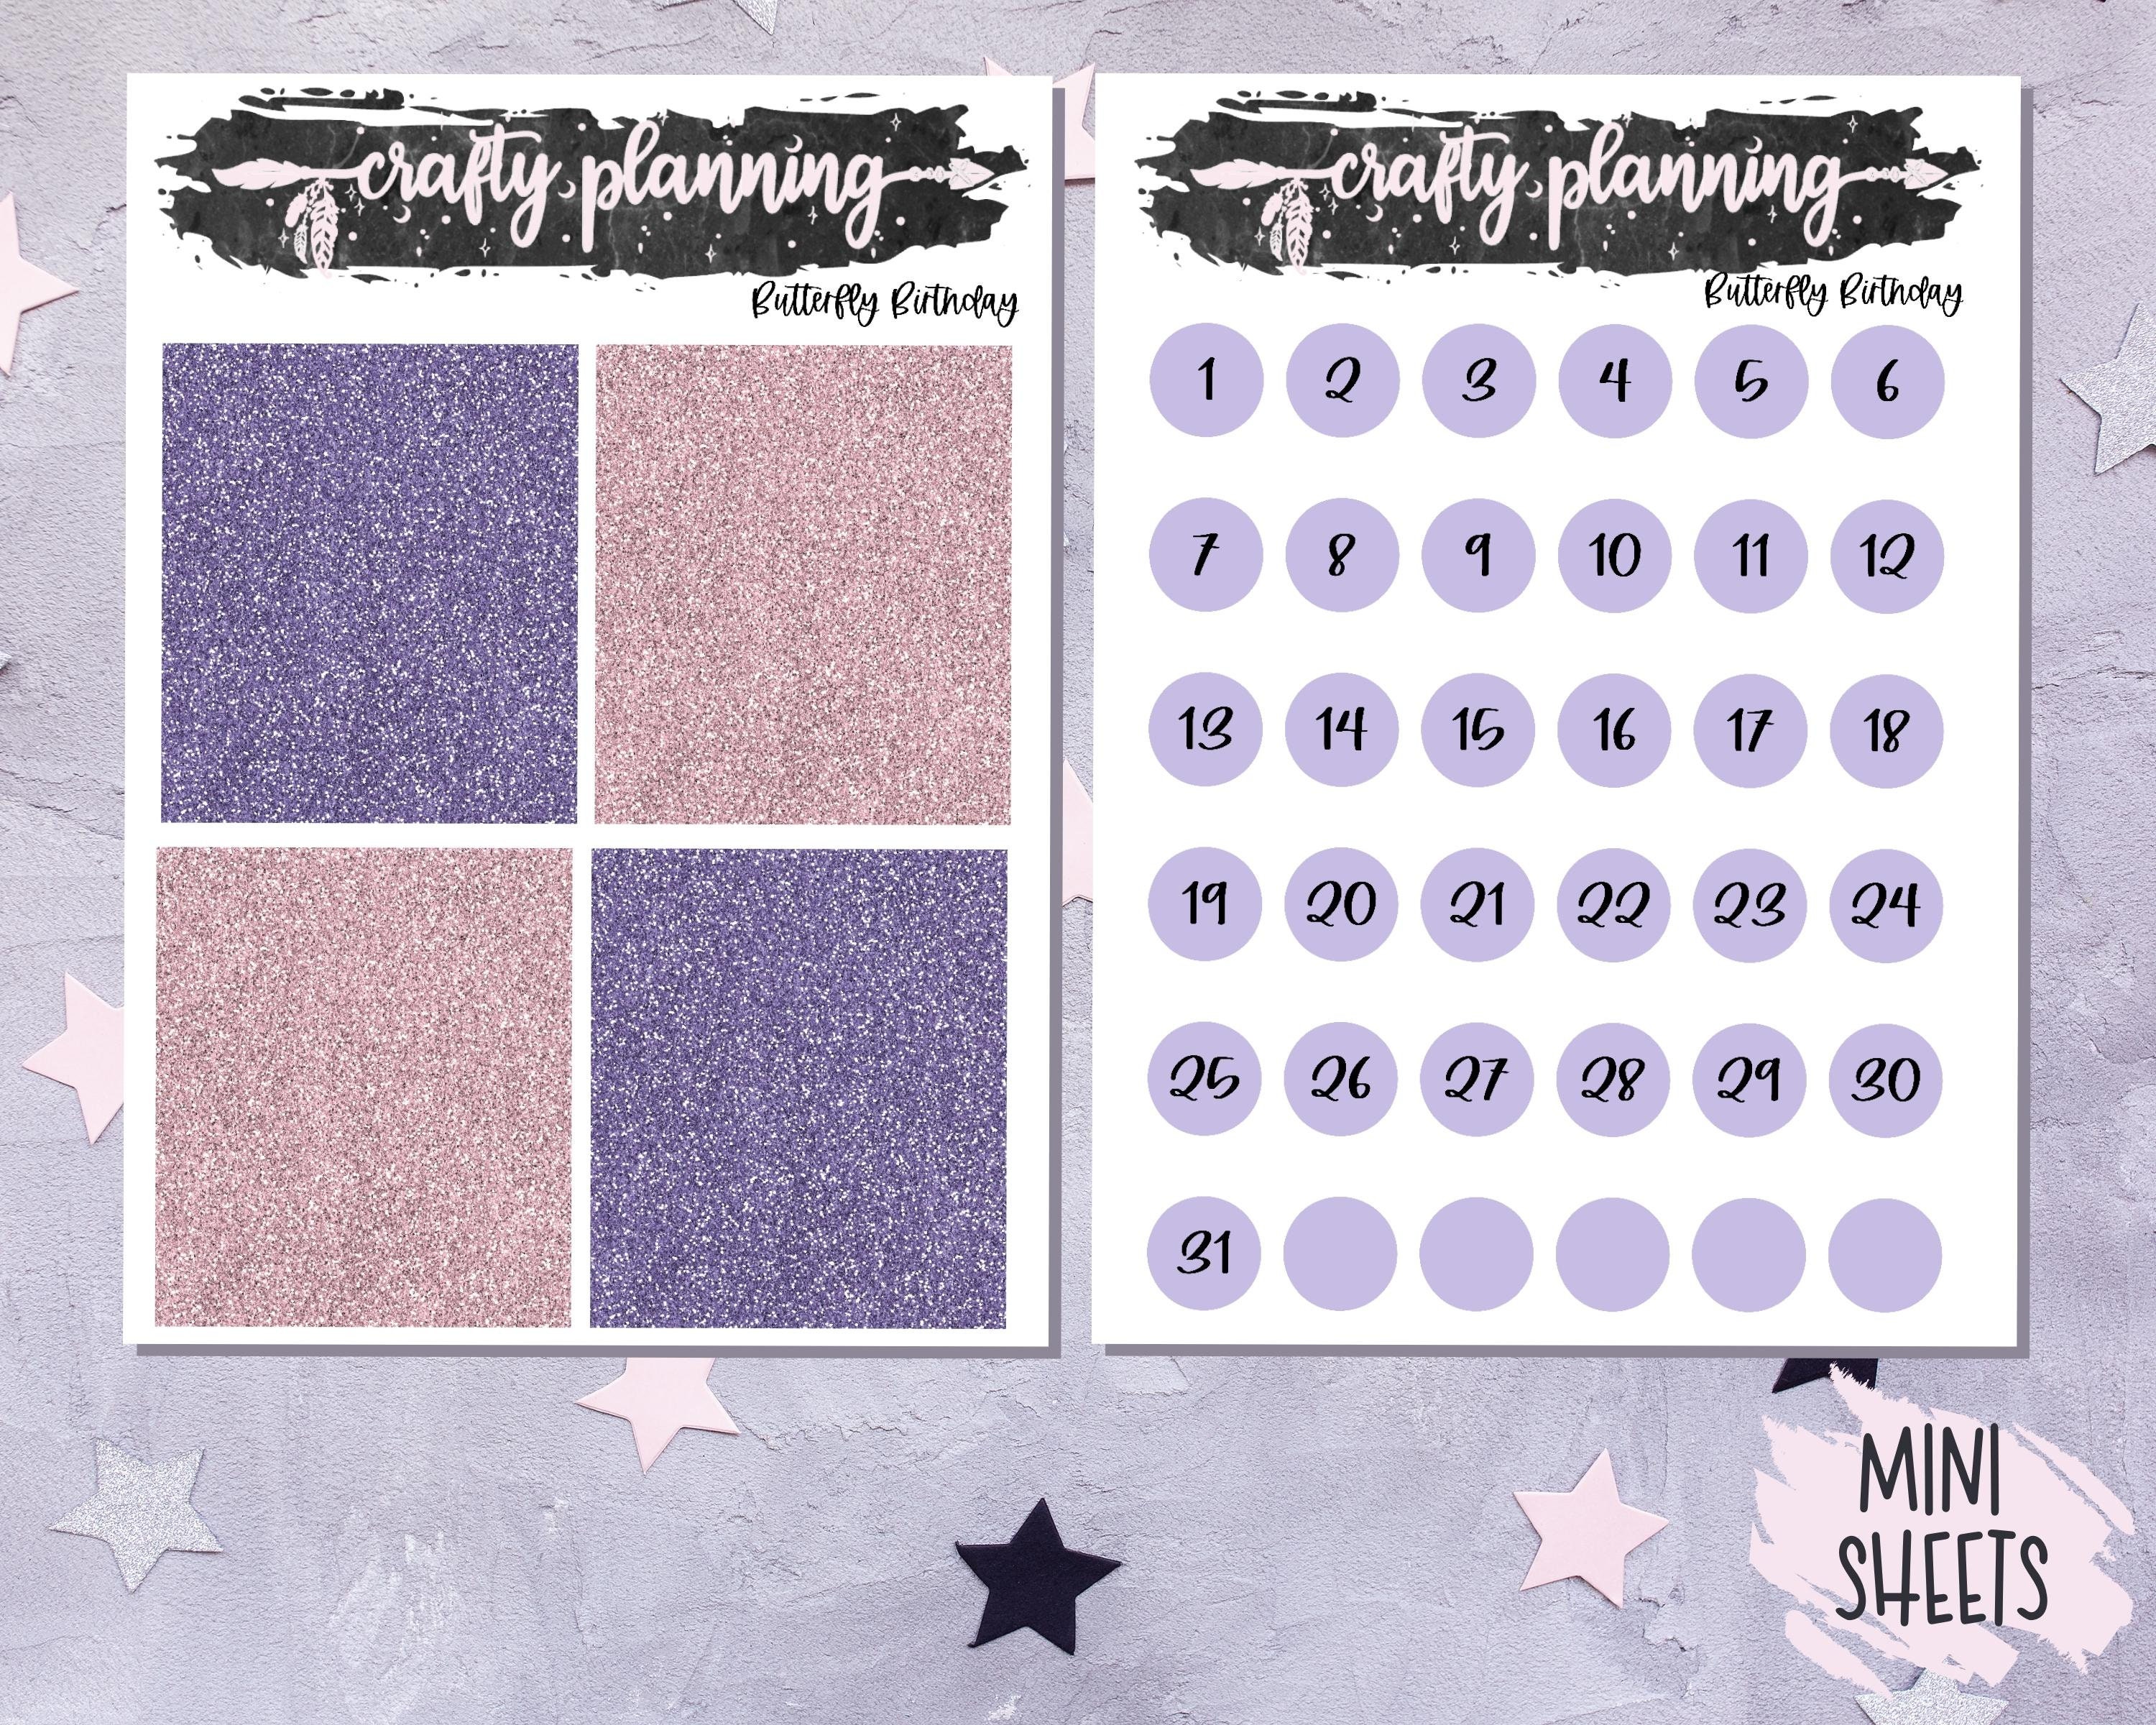 Vote Mini Sheet of Planner Stickers – Virgo and Paper